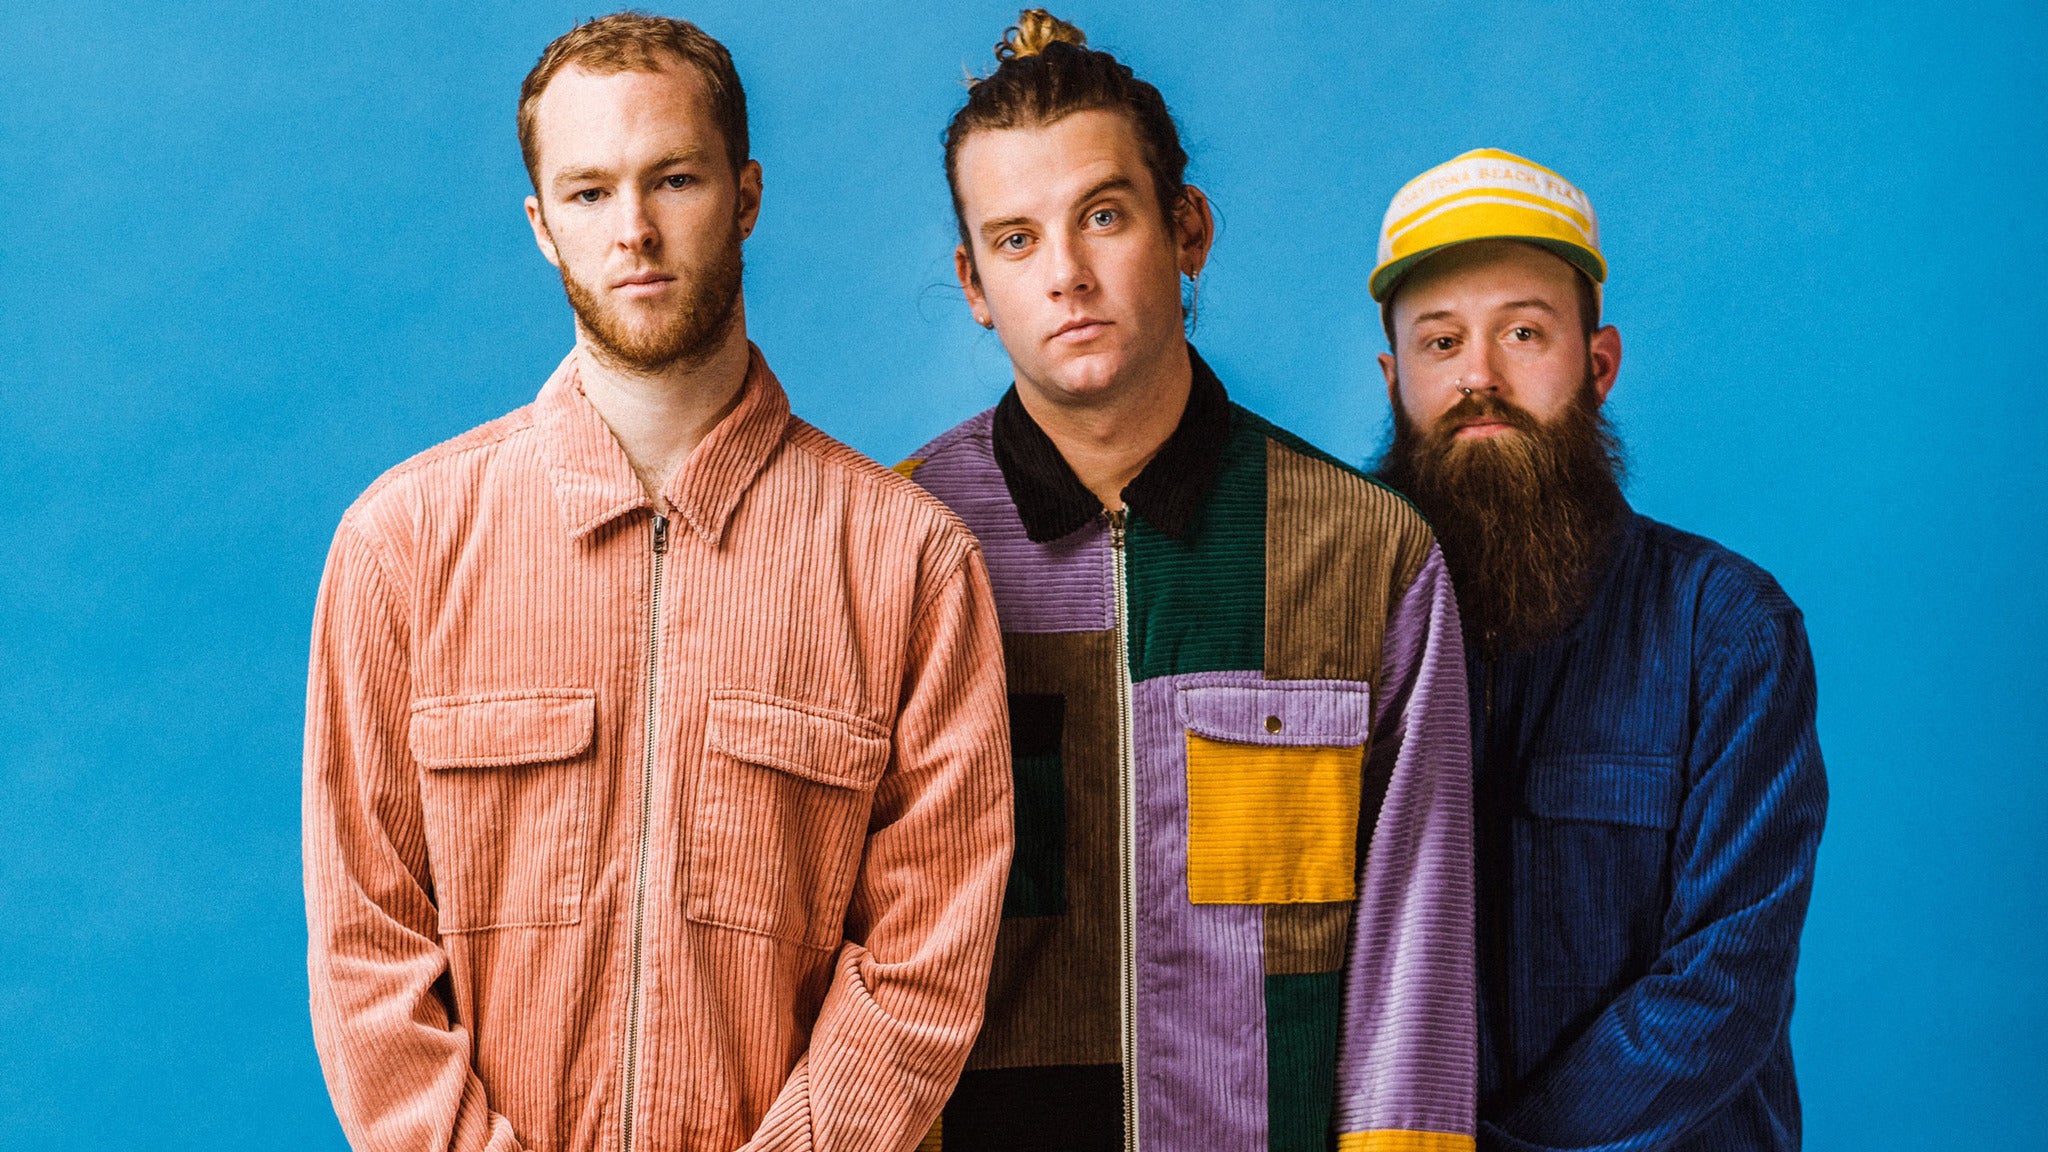 101WKQX Presents: Judah & the Lion - Going to Mars tour in Chicago promo photo for Citi® Cardmember presale offer code